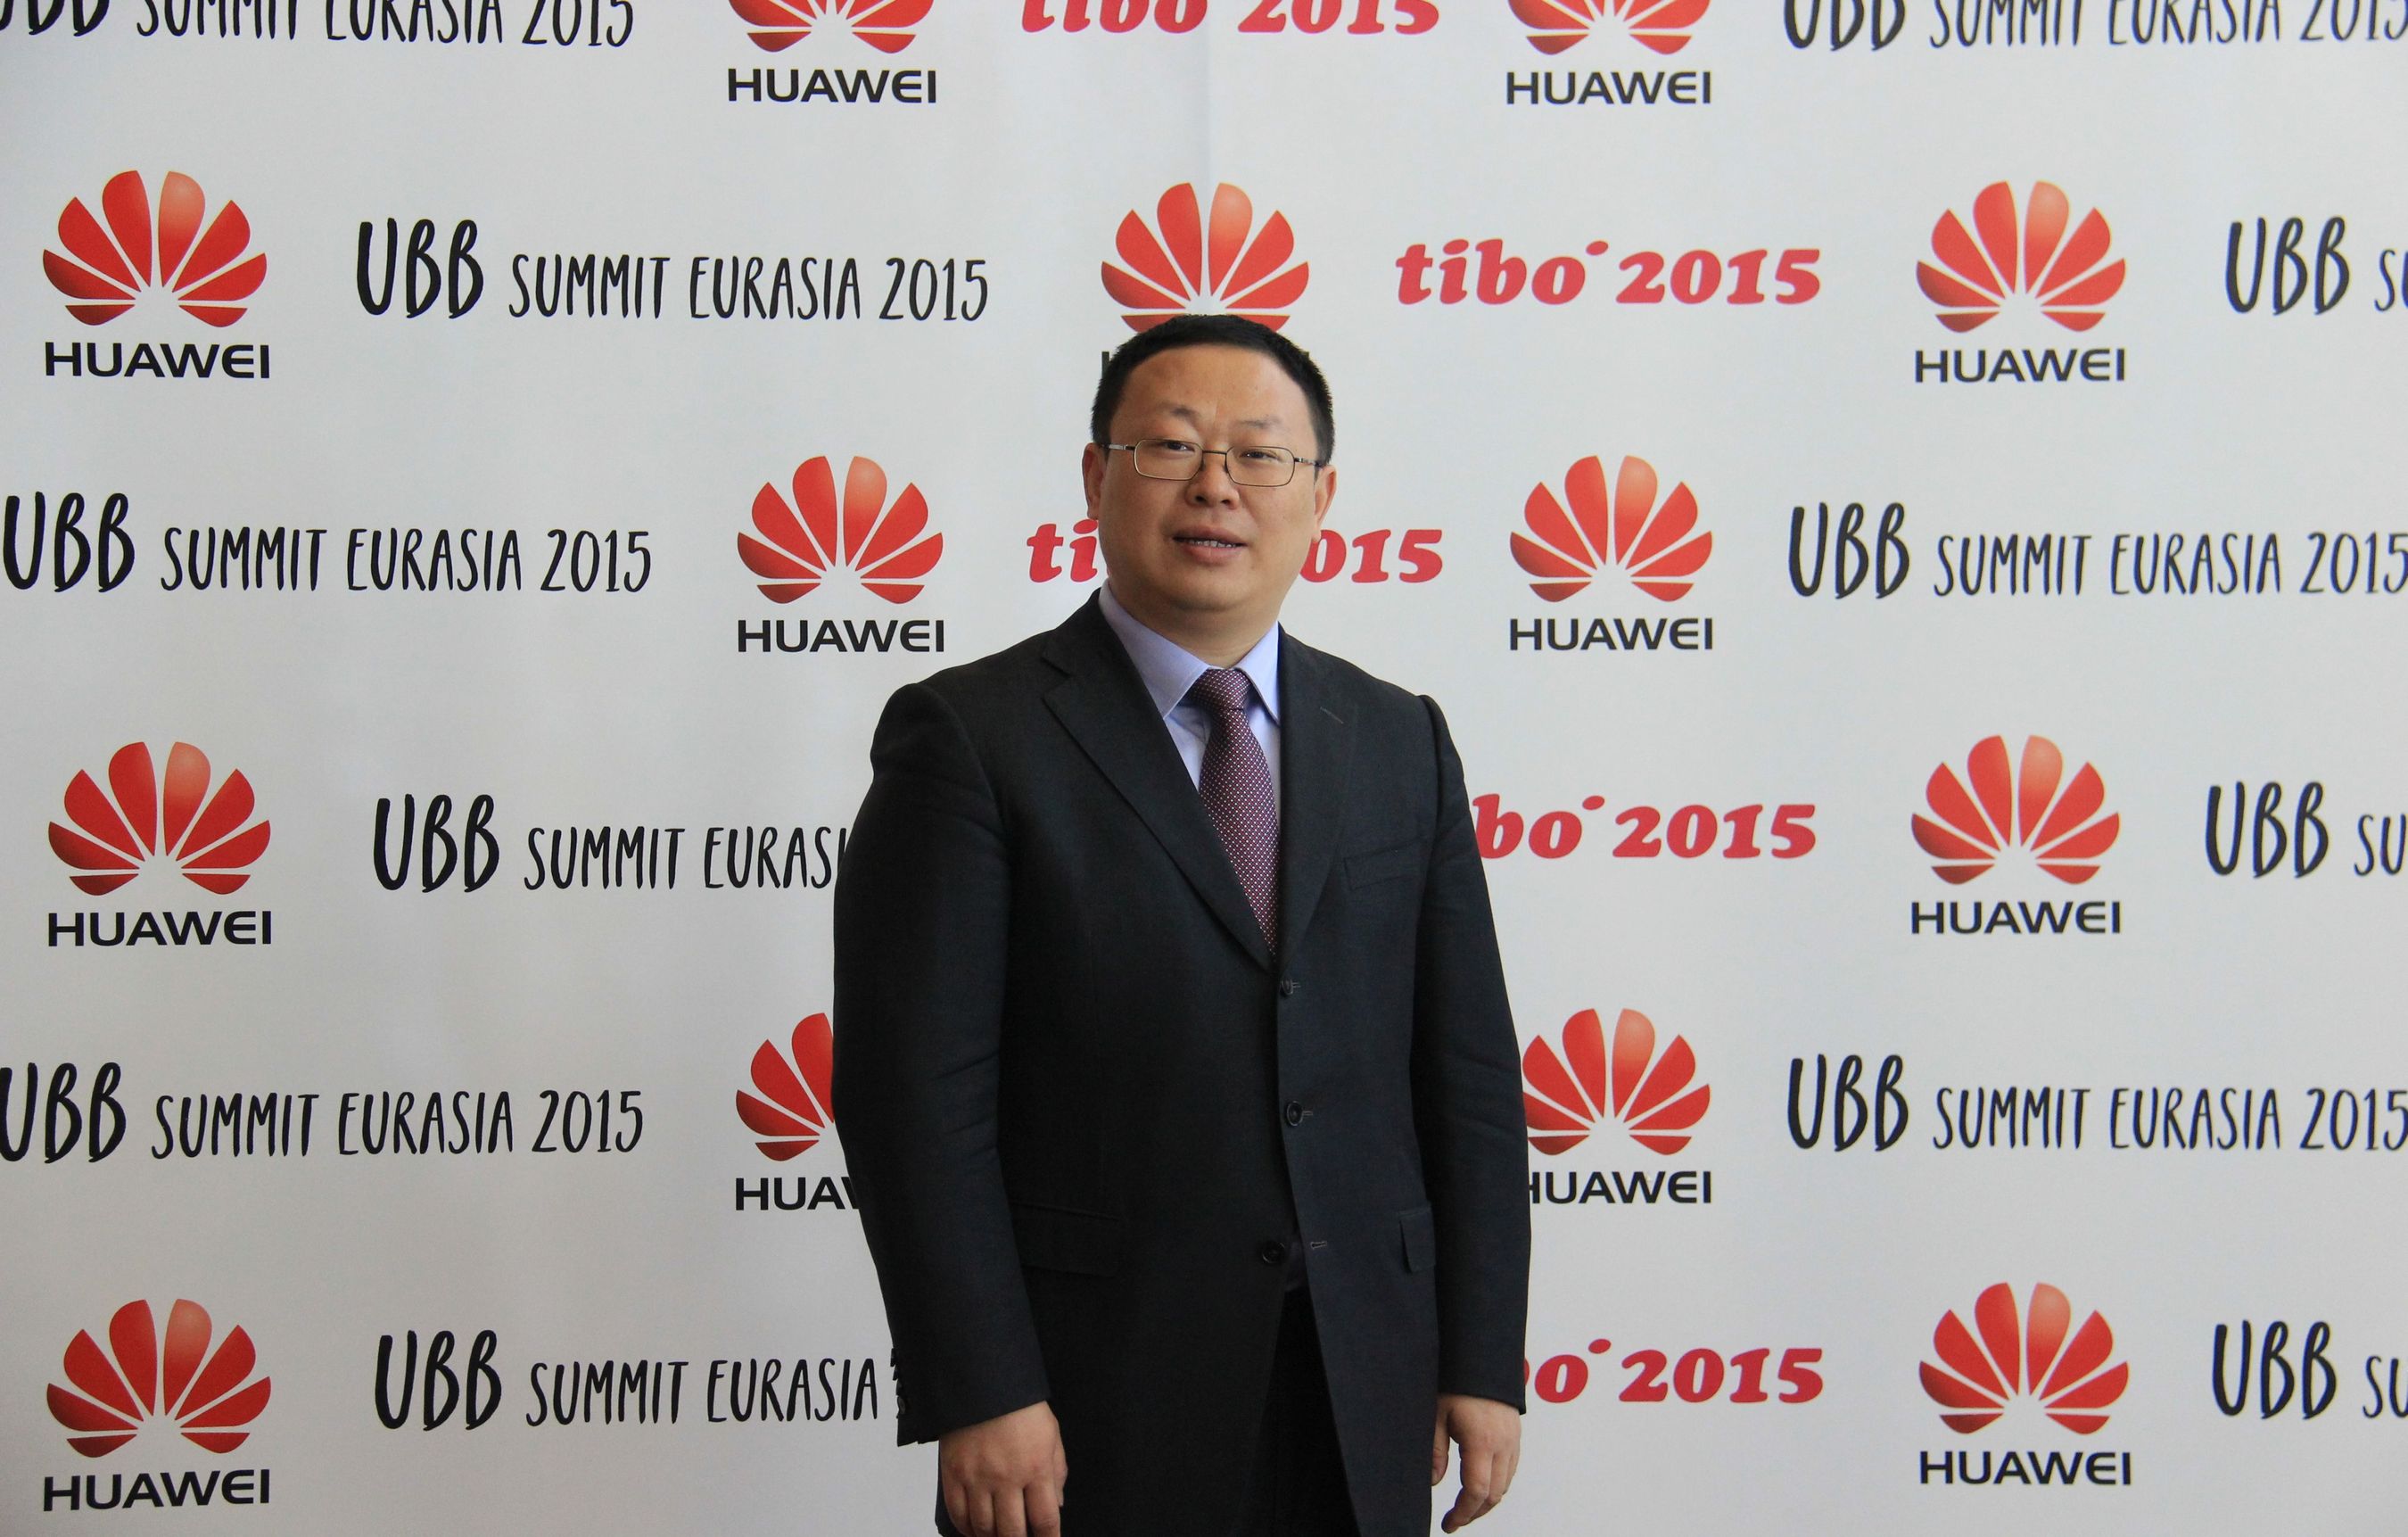 Huawei hosts Eurasia UBB Summit with Belarusian Ministry of Communications and Information and launches innovative ICT solutions at TIBO 2015 (PRNewsFoto/Huawei Global)